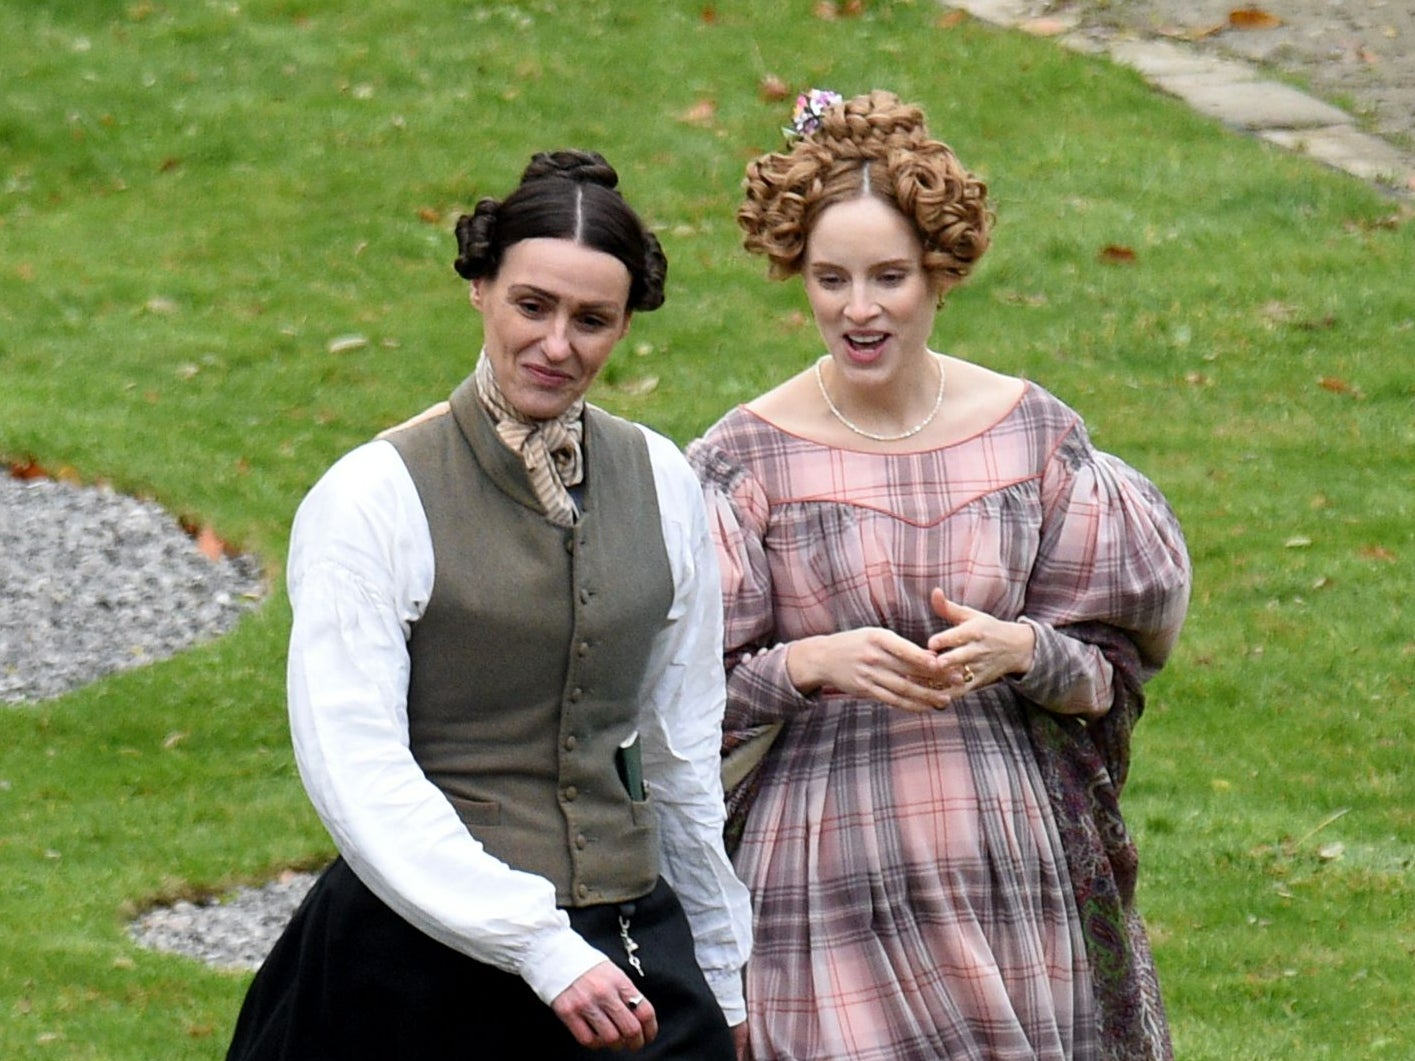 Suranne Jones is pictured in her role of Anne Lister in the BBC drama Gentleman Jack alongside actress Sophie Rundle who plays wife Ann Walker.